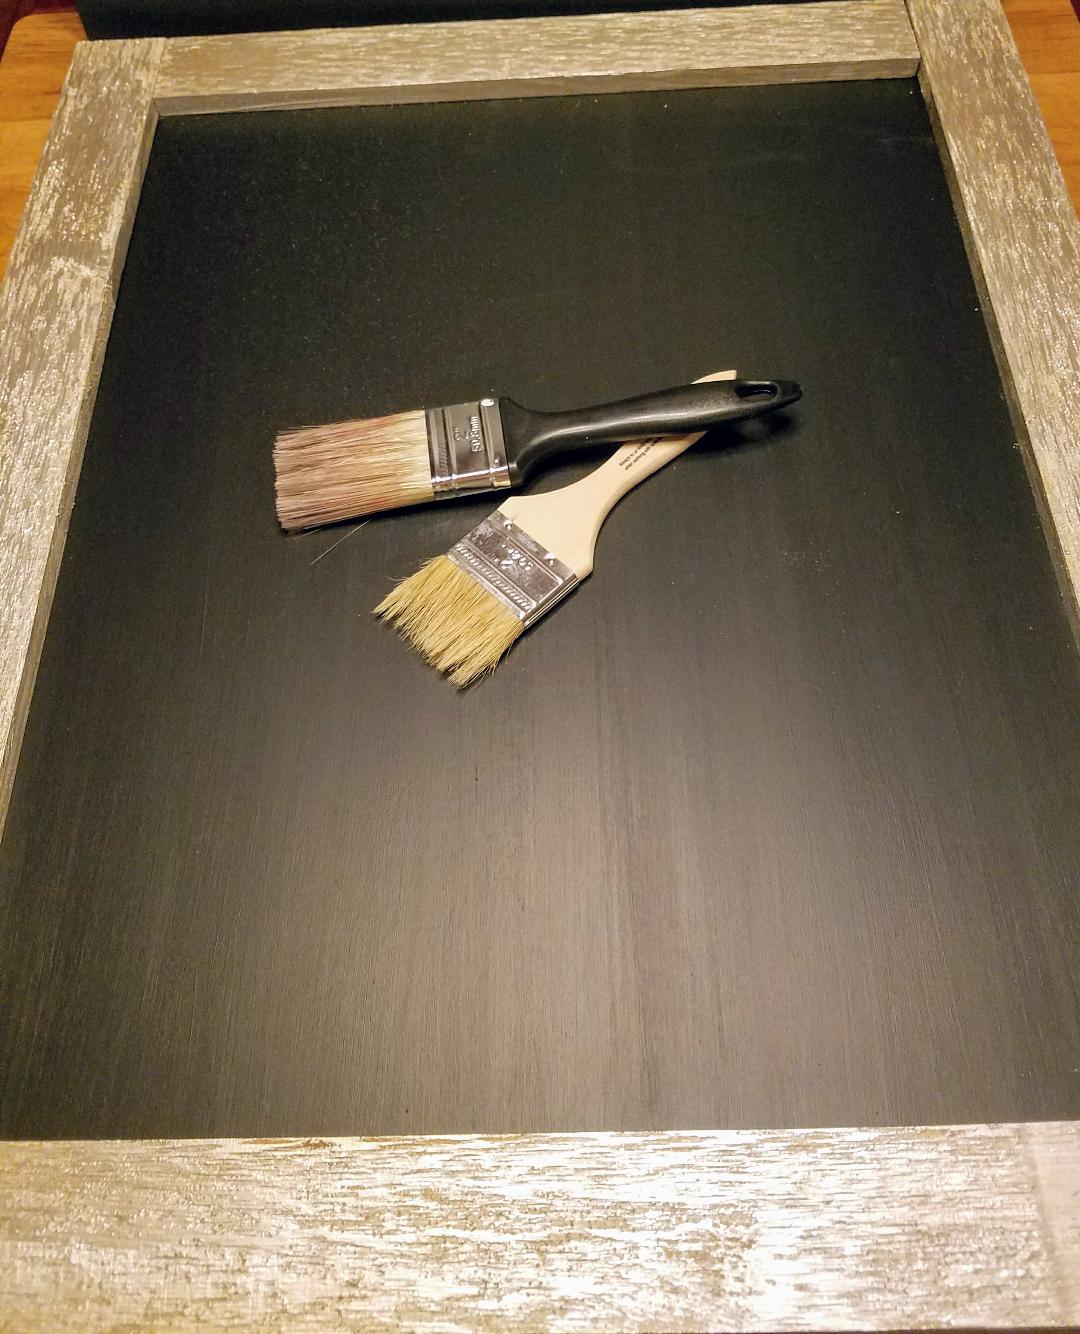 How to Make Chalkboard Paint